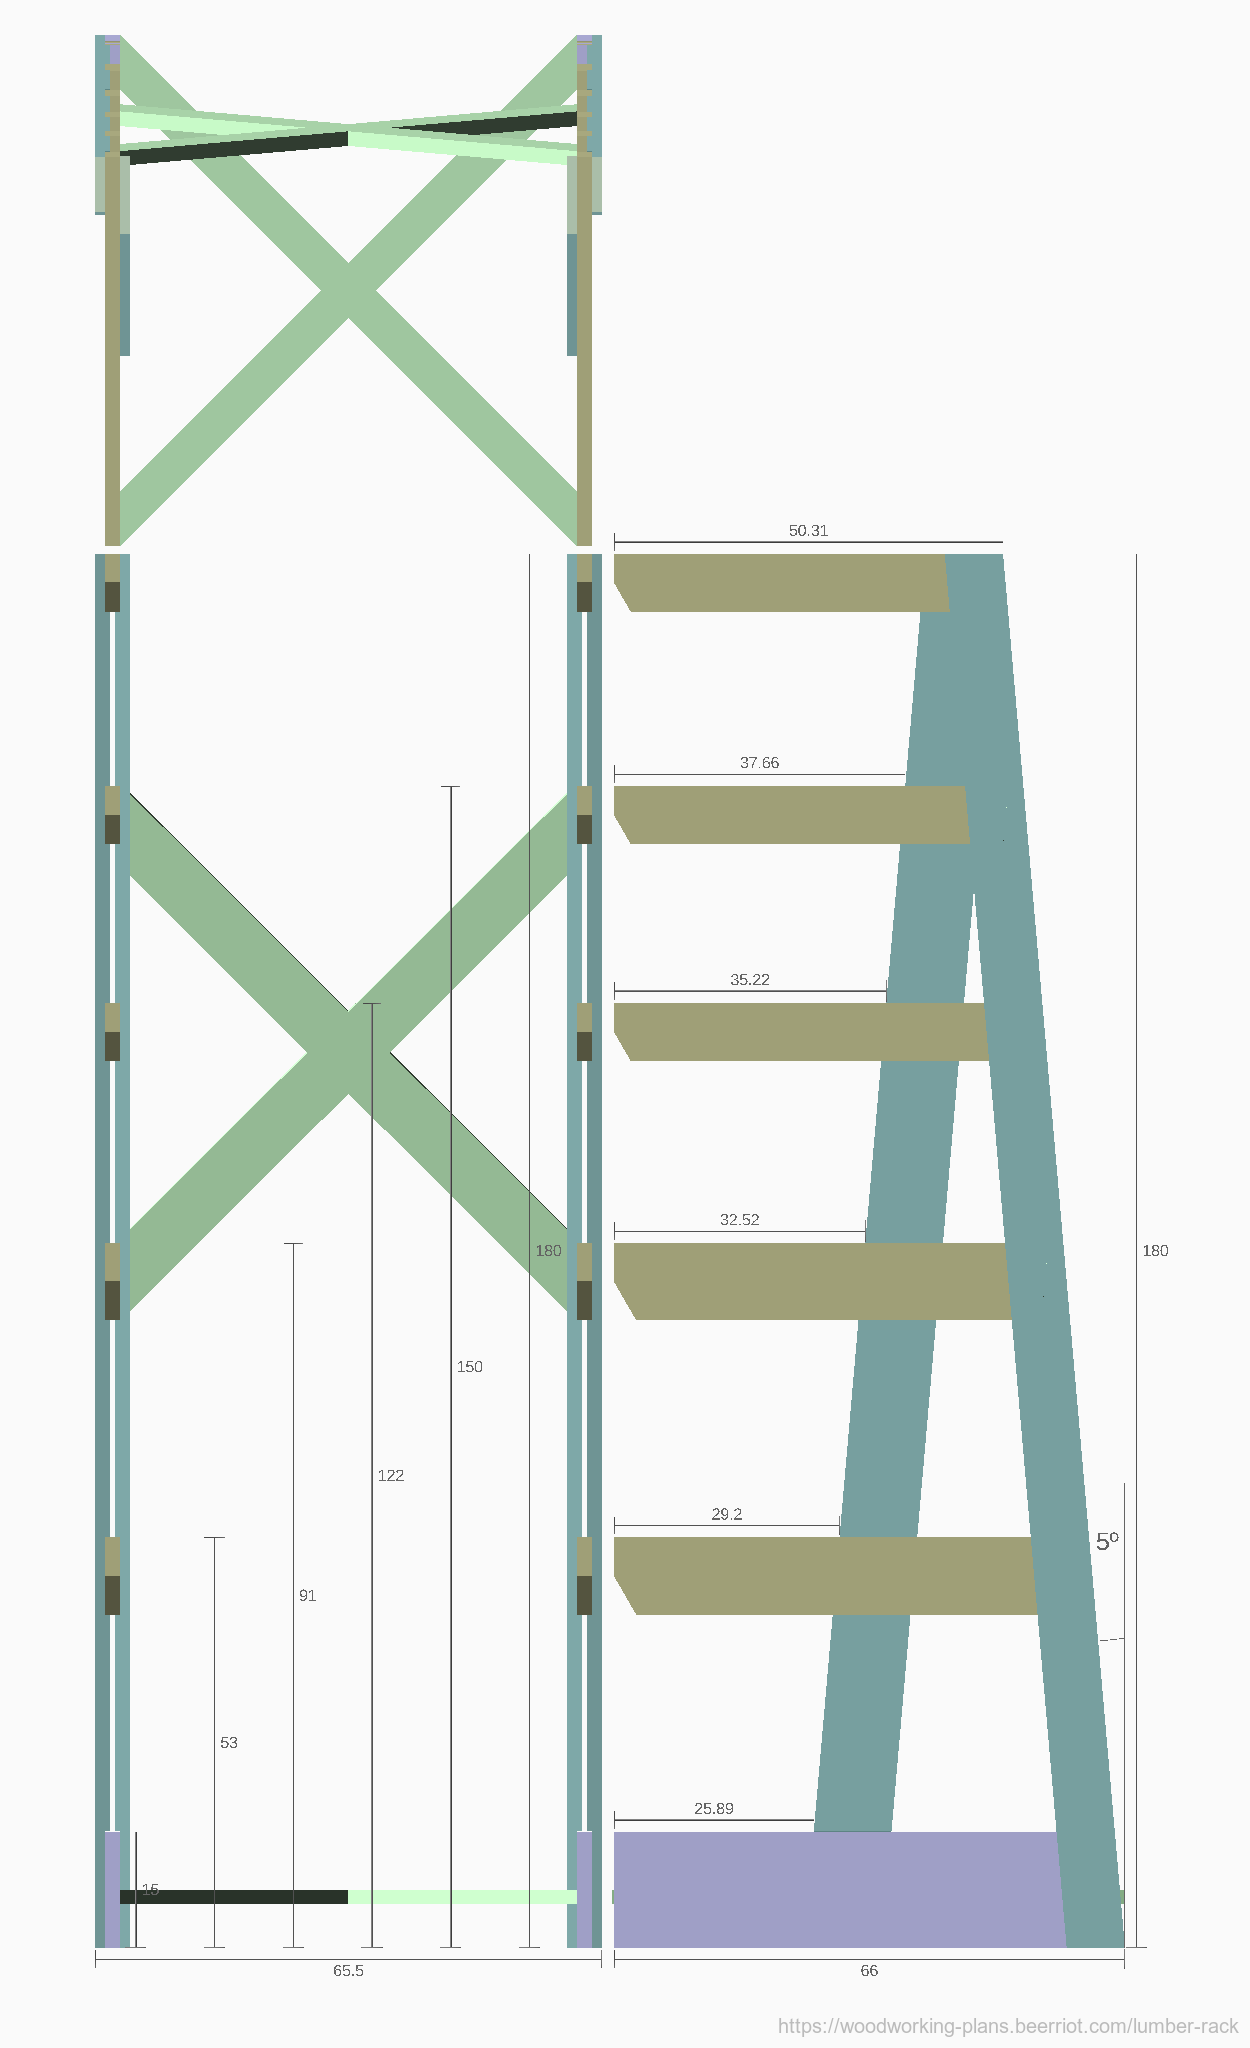 Third-angle view of the assembled lumber rack.